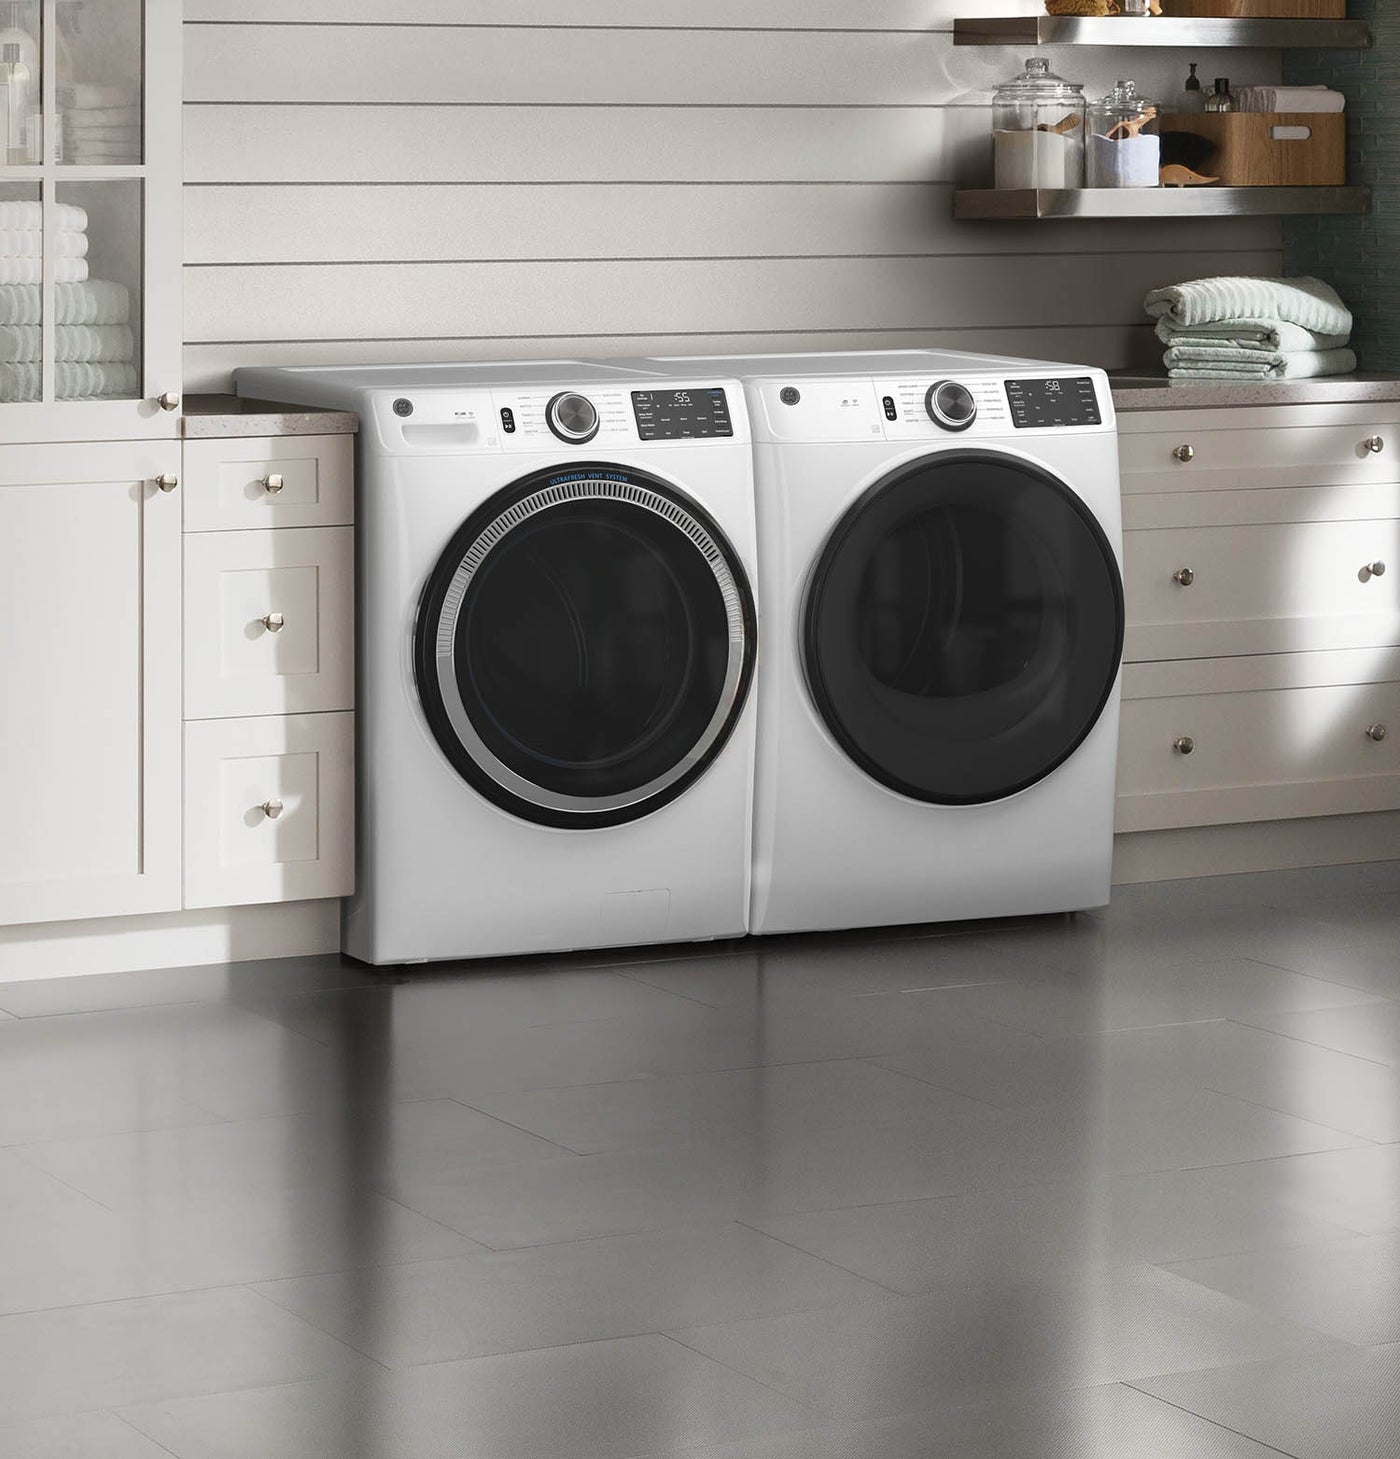 GE White Front Load Washer (5.5 Cu. Ft.) & White Gas Front Load Dryer (7.8 Cu. Ft.) - GFW550SMNWW/GFD55GSSNWW